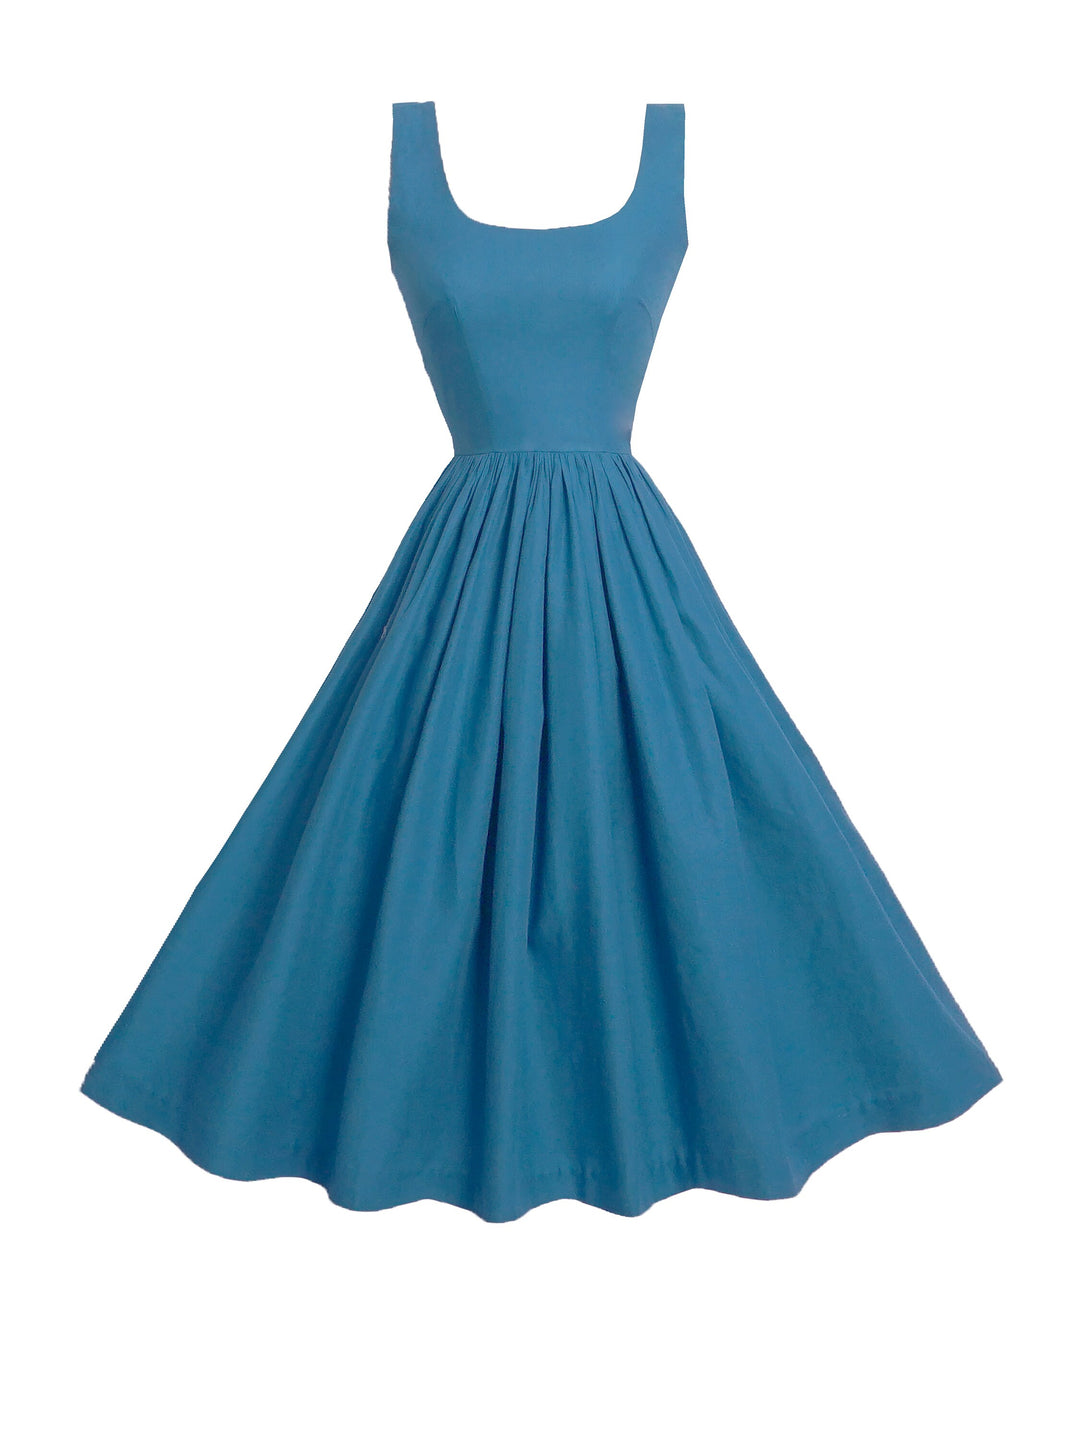 RTS - Size XS - Emily Dress in Air Force Blue Cotton